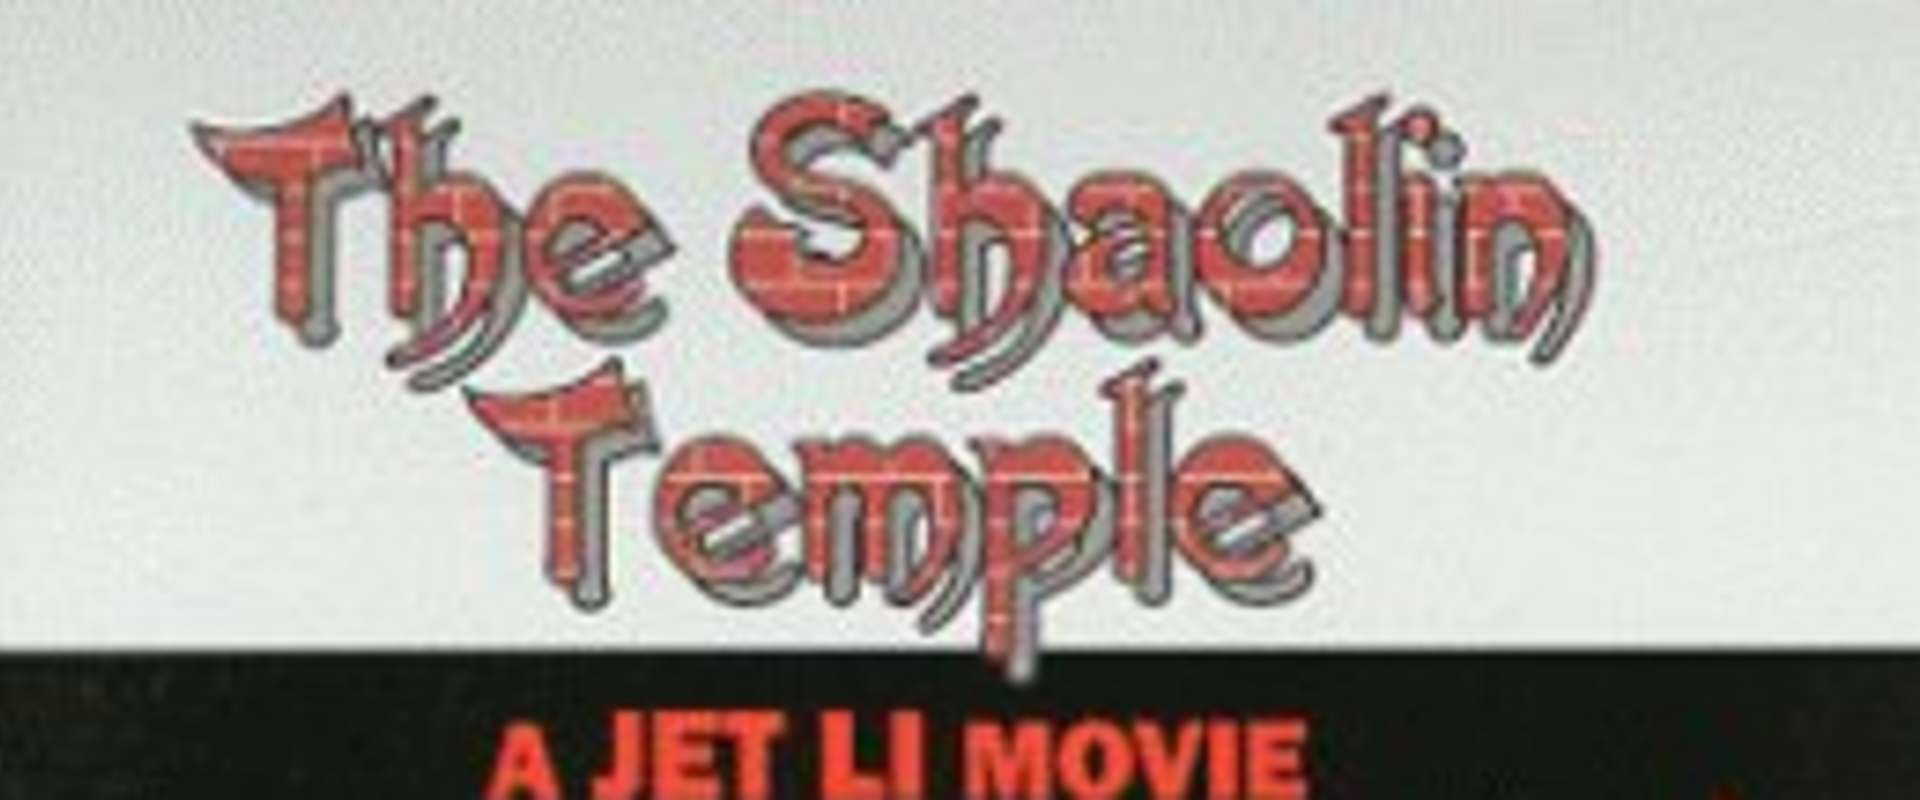 The Shaolin Temple background 2